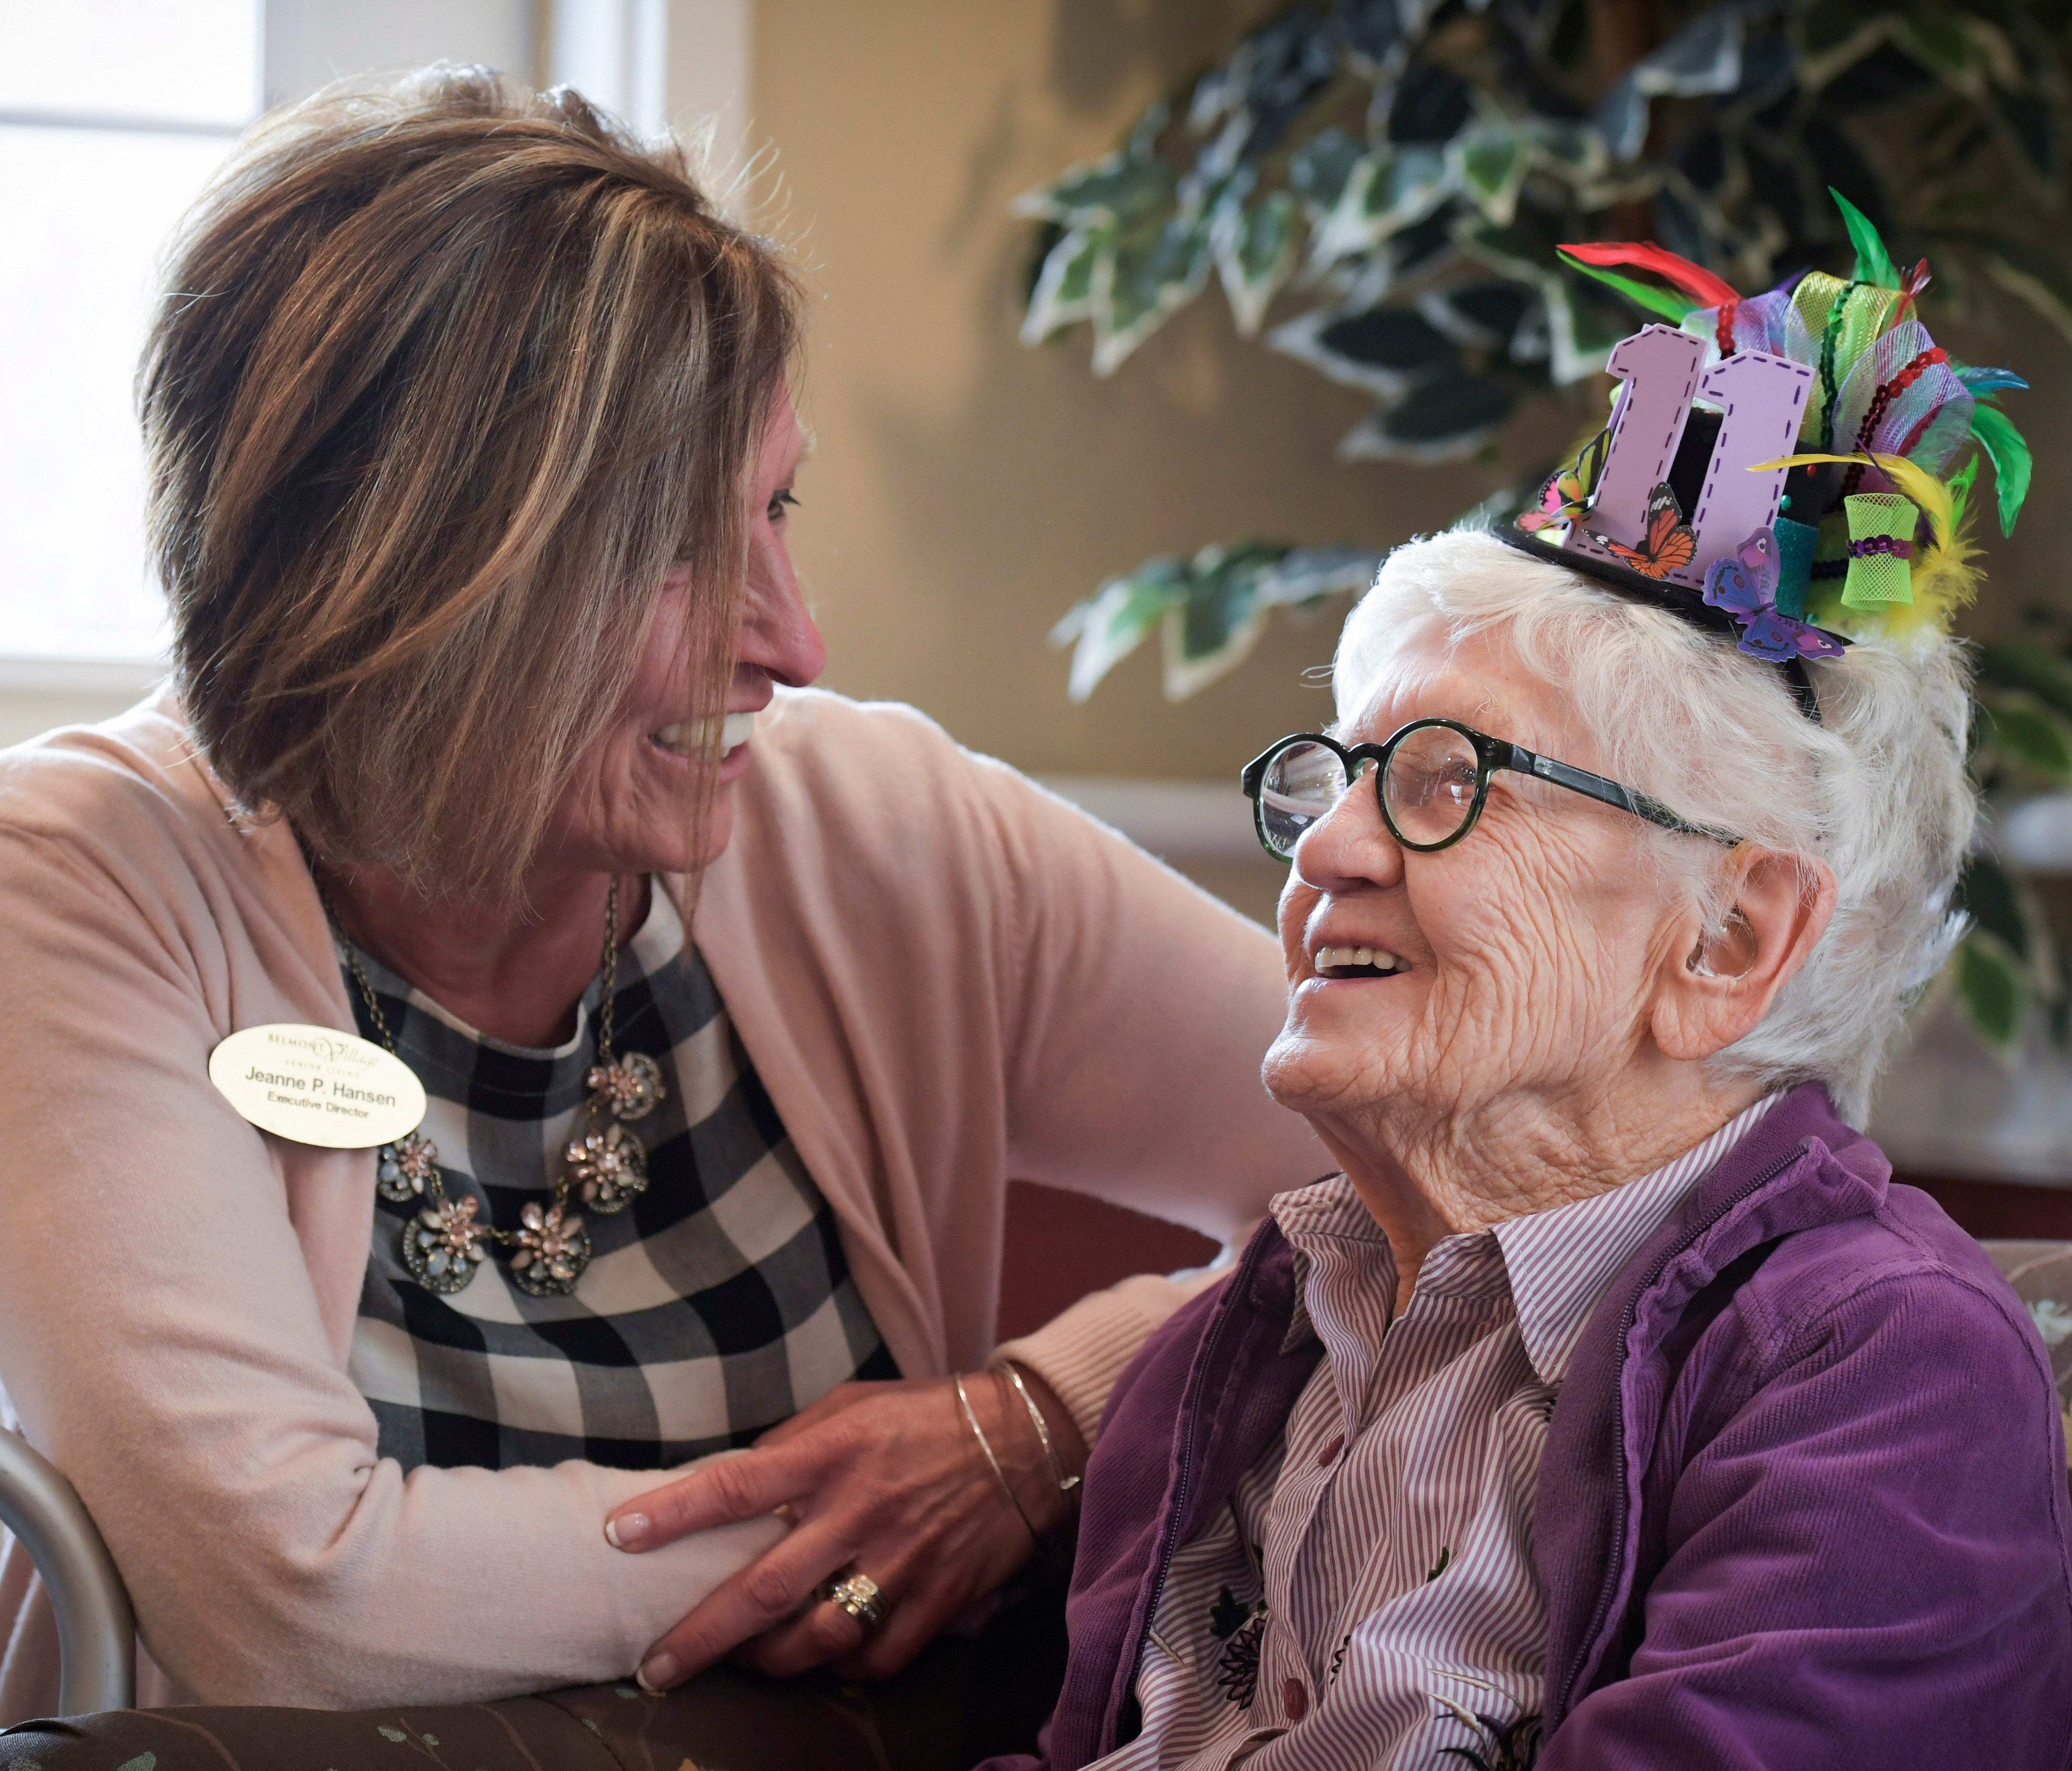 Belmont Village Executive Director Jeanne Hansen chats with Merle Phillips as Phillips celebrates her 111th birthday at the retirement community in Carol Stream, Ill. Monday, April 2, 2018.